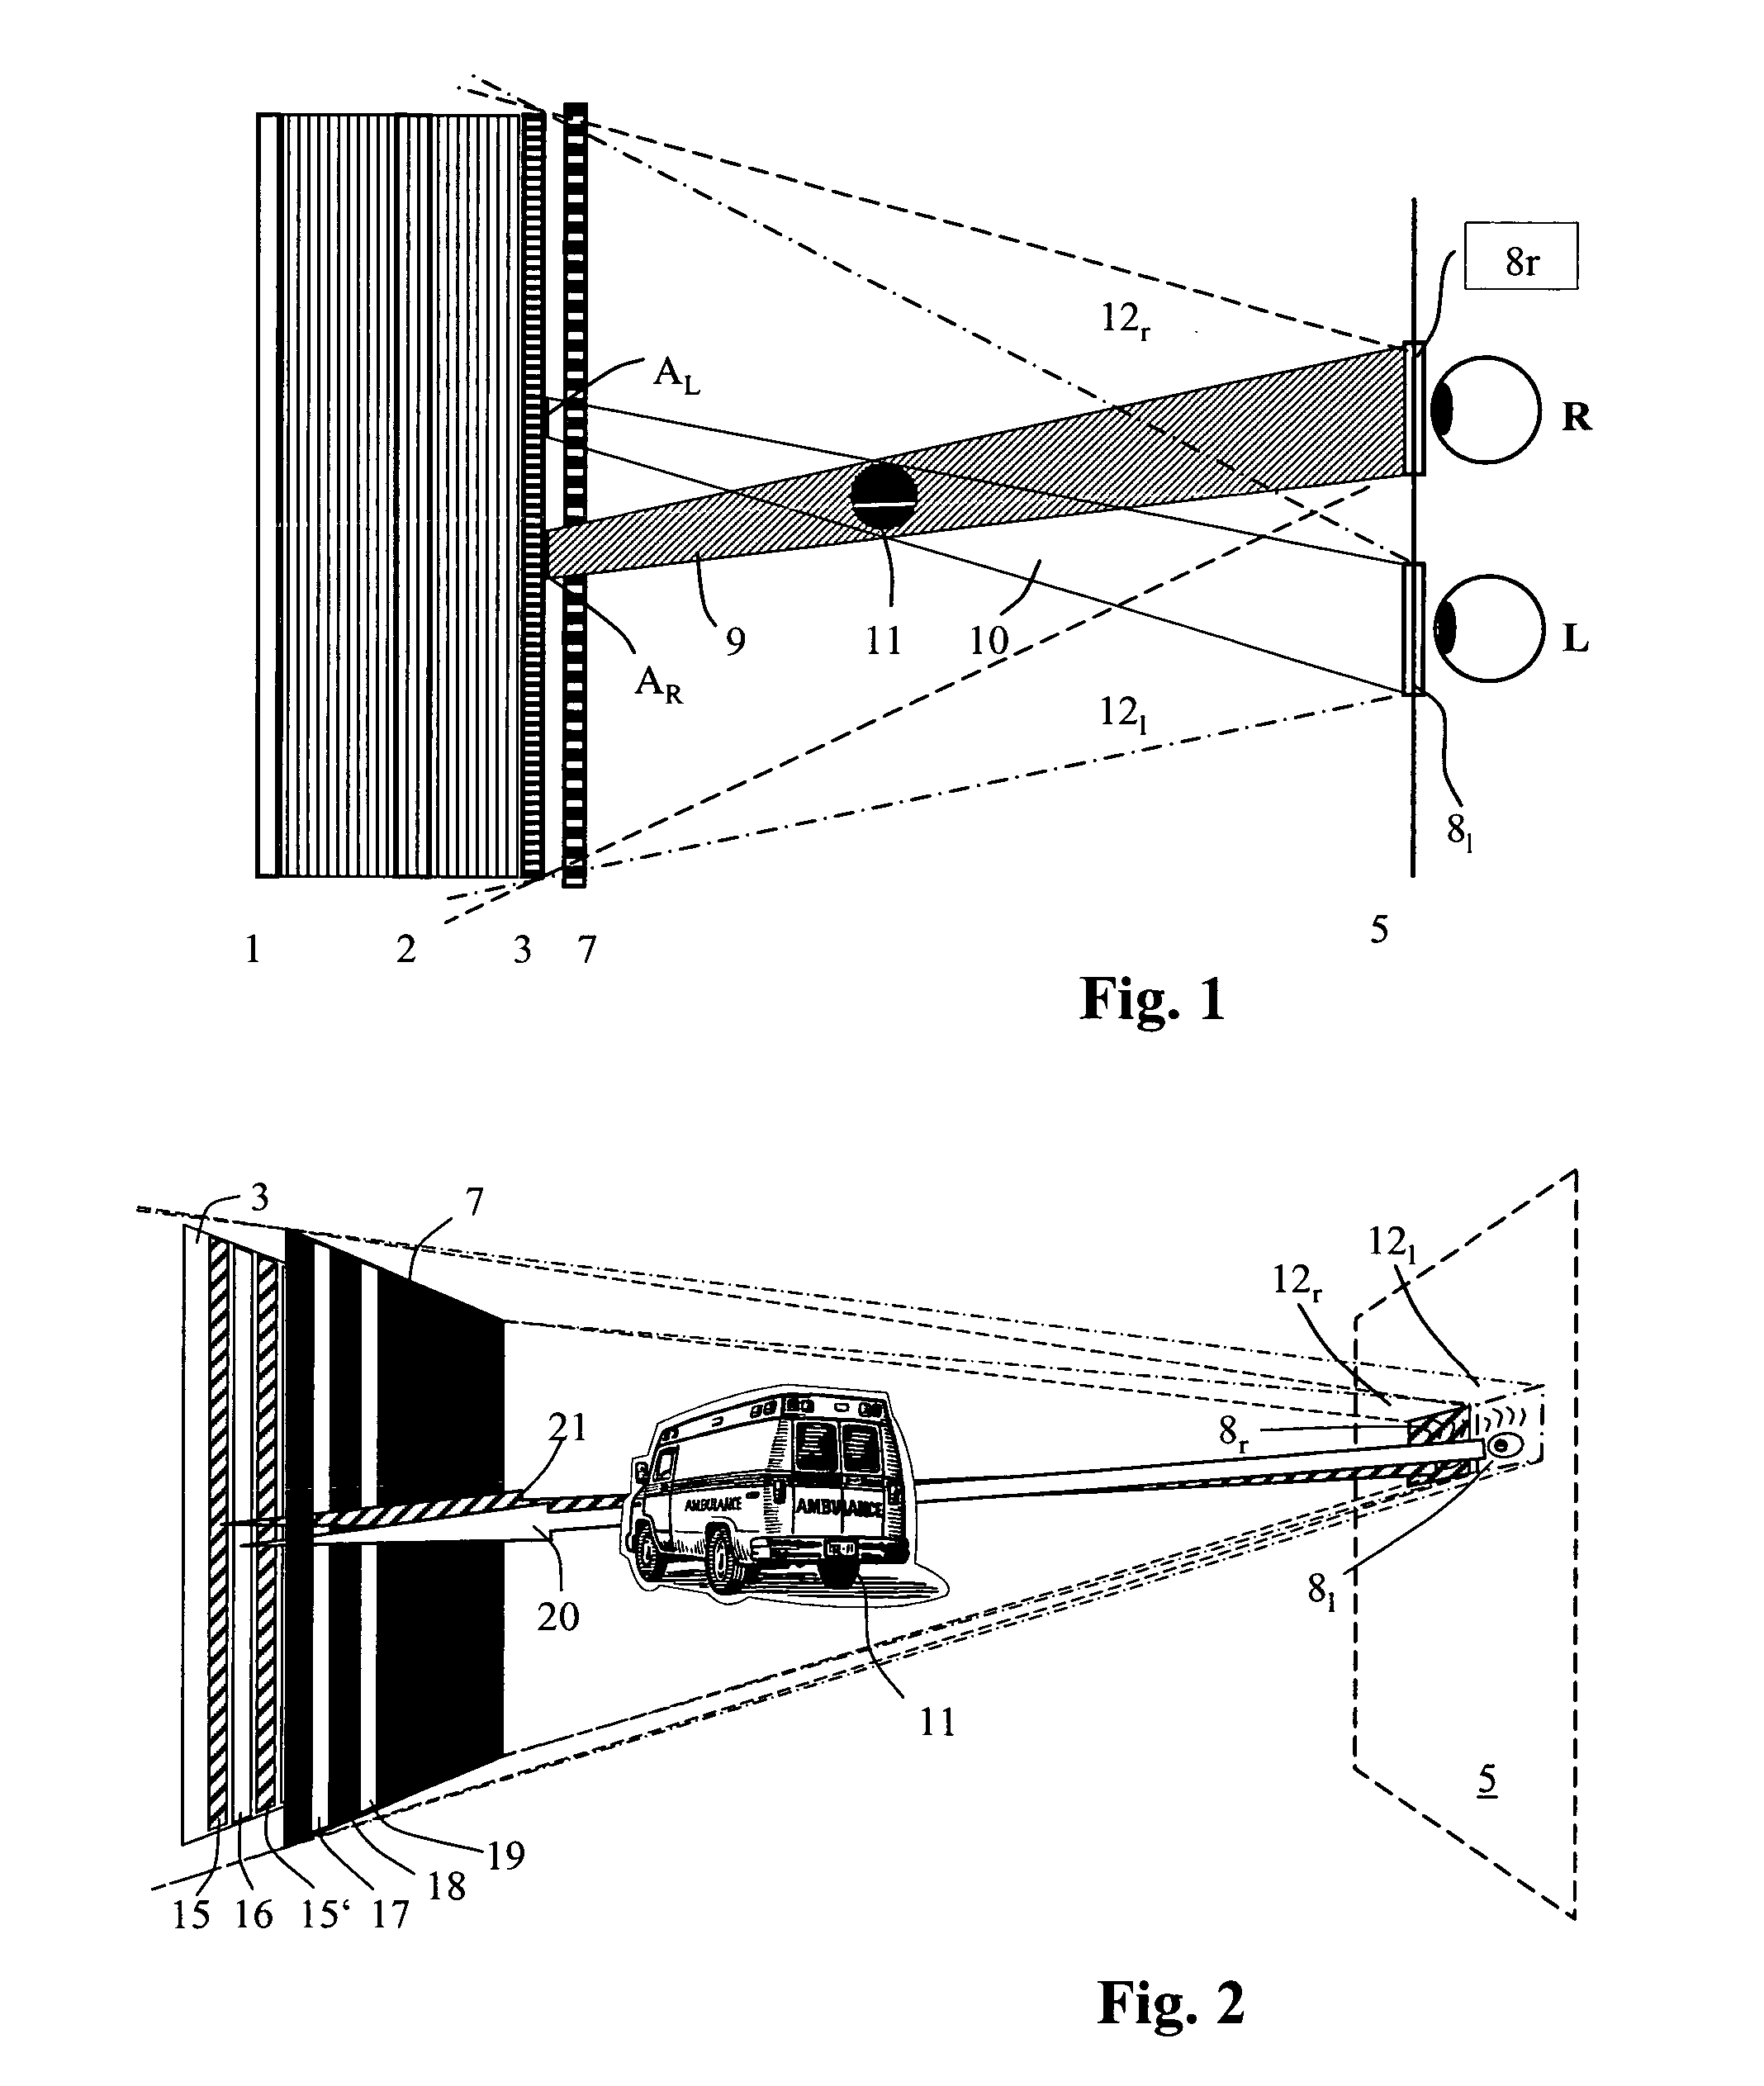 Method for encoding video holograms for holographically reconstructing a scene